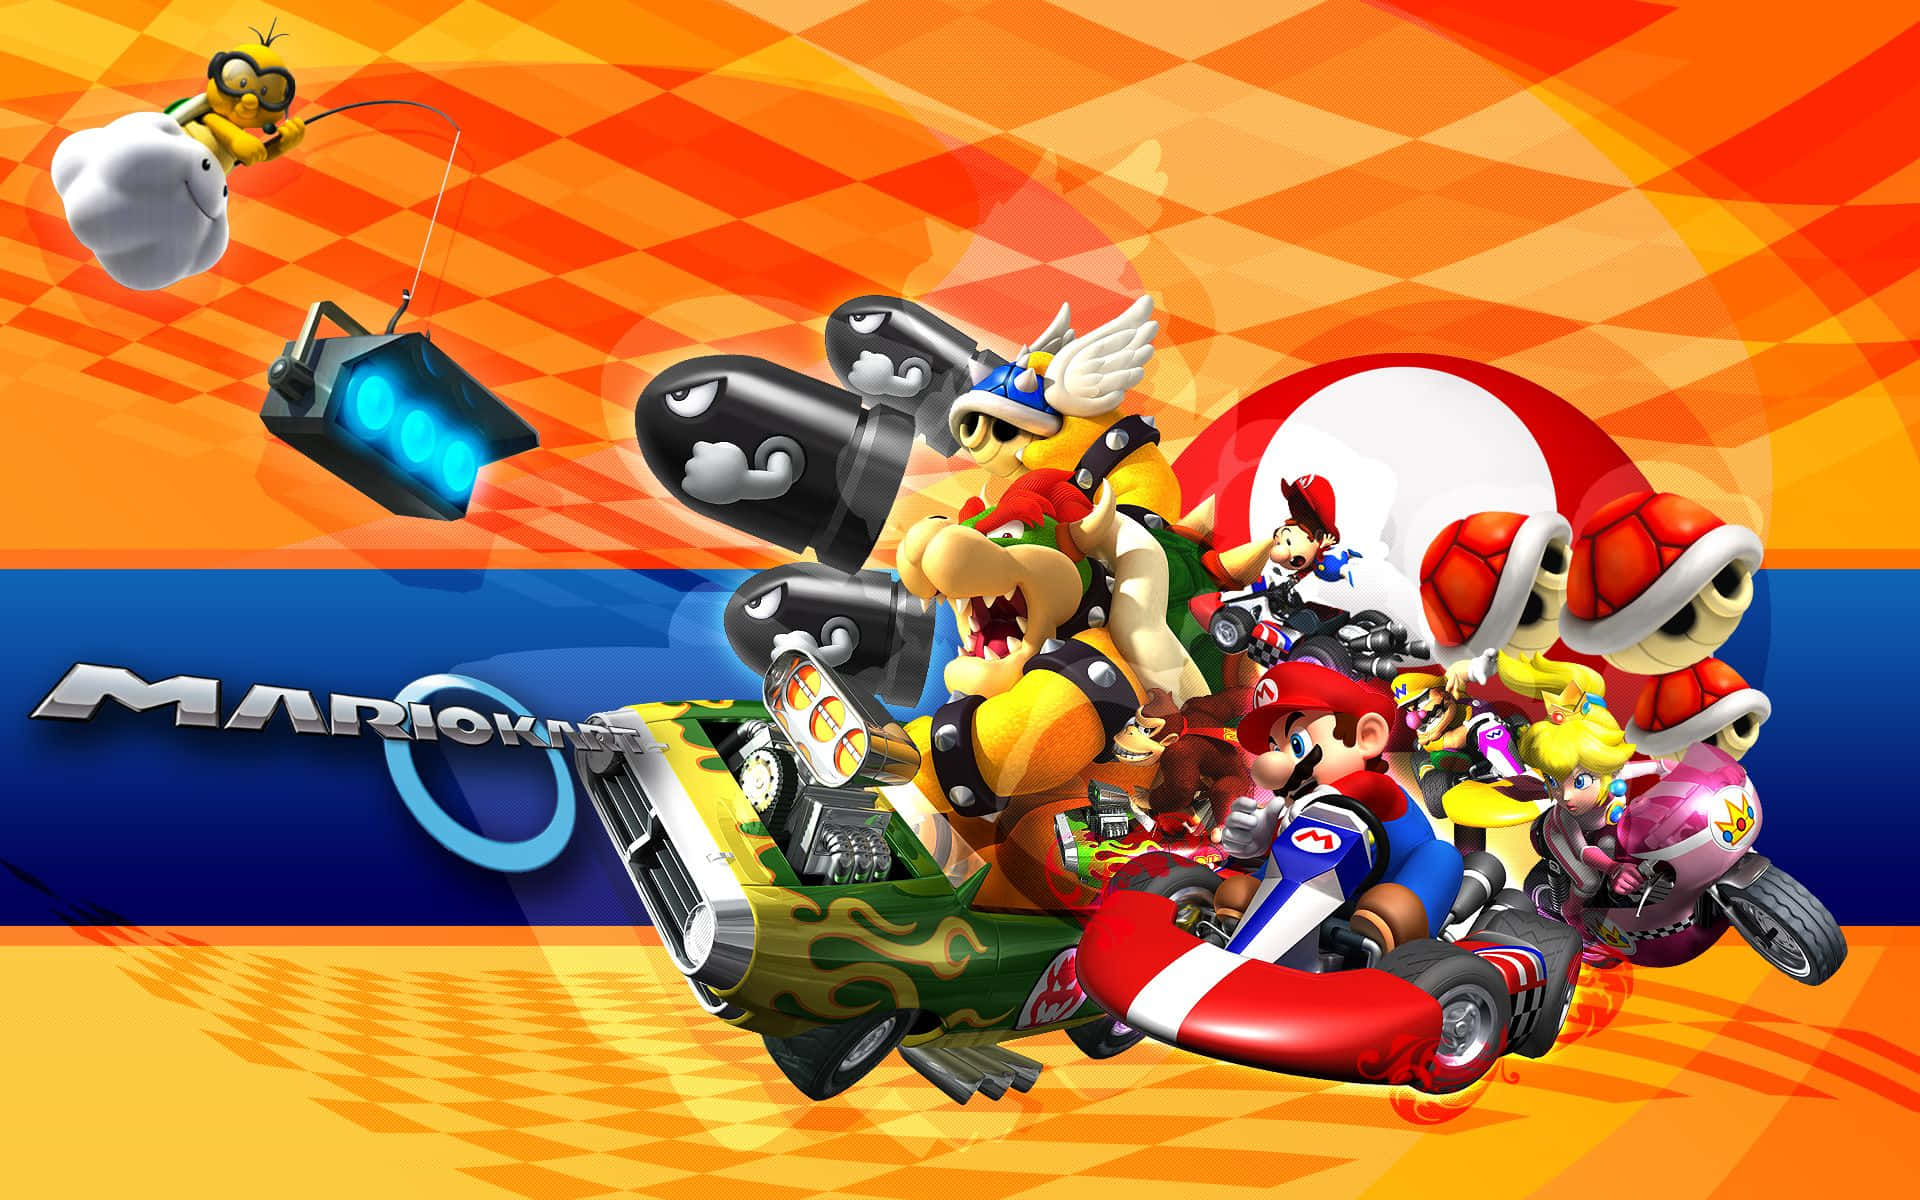 Race your way to victory in Mario Kart